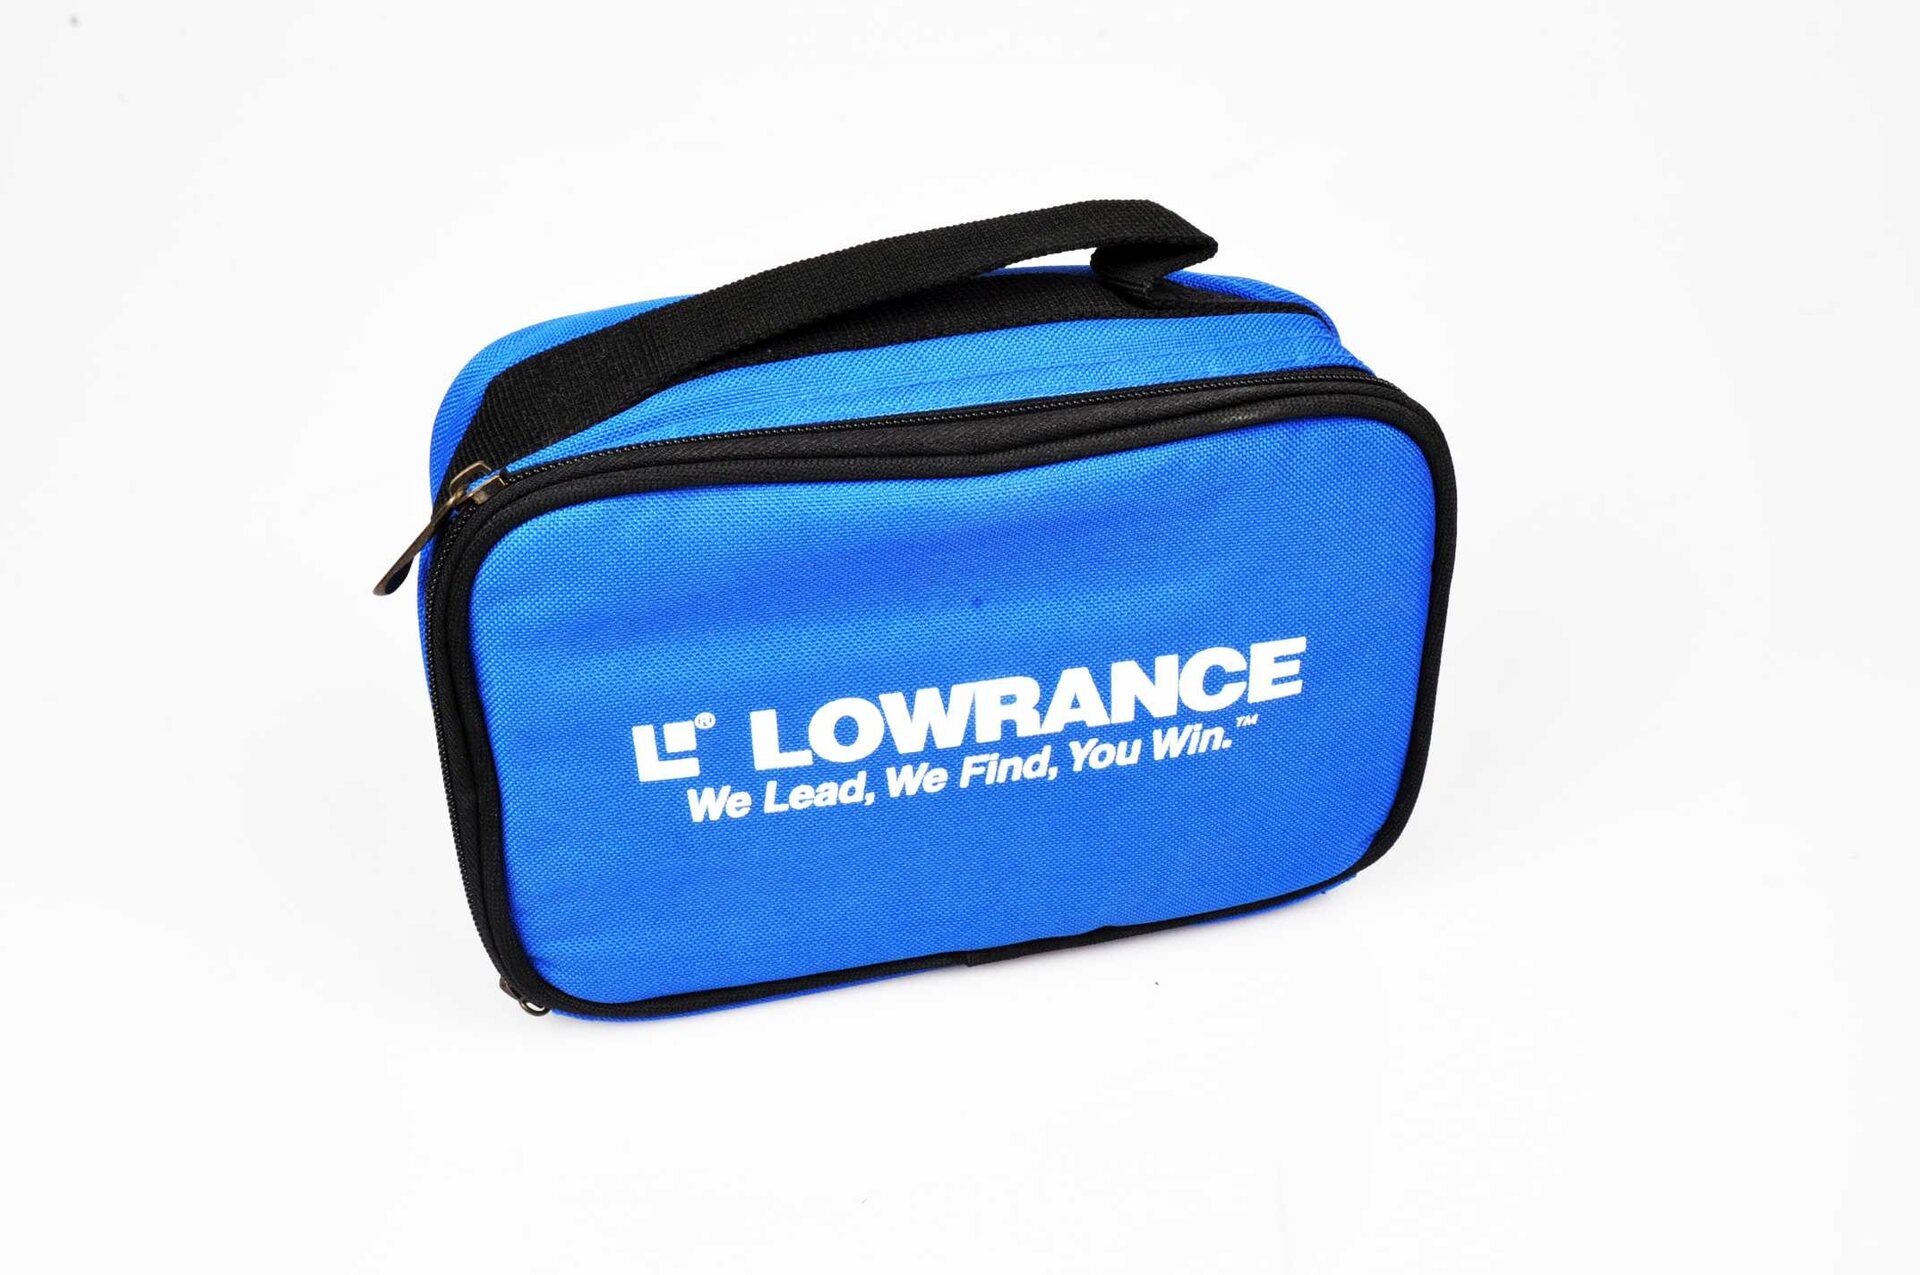 Lowrance Cover bag for fish finder, Chartplotter and Sonar accessories